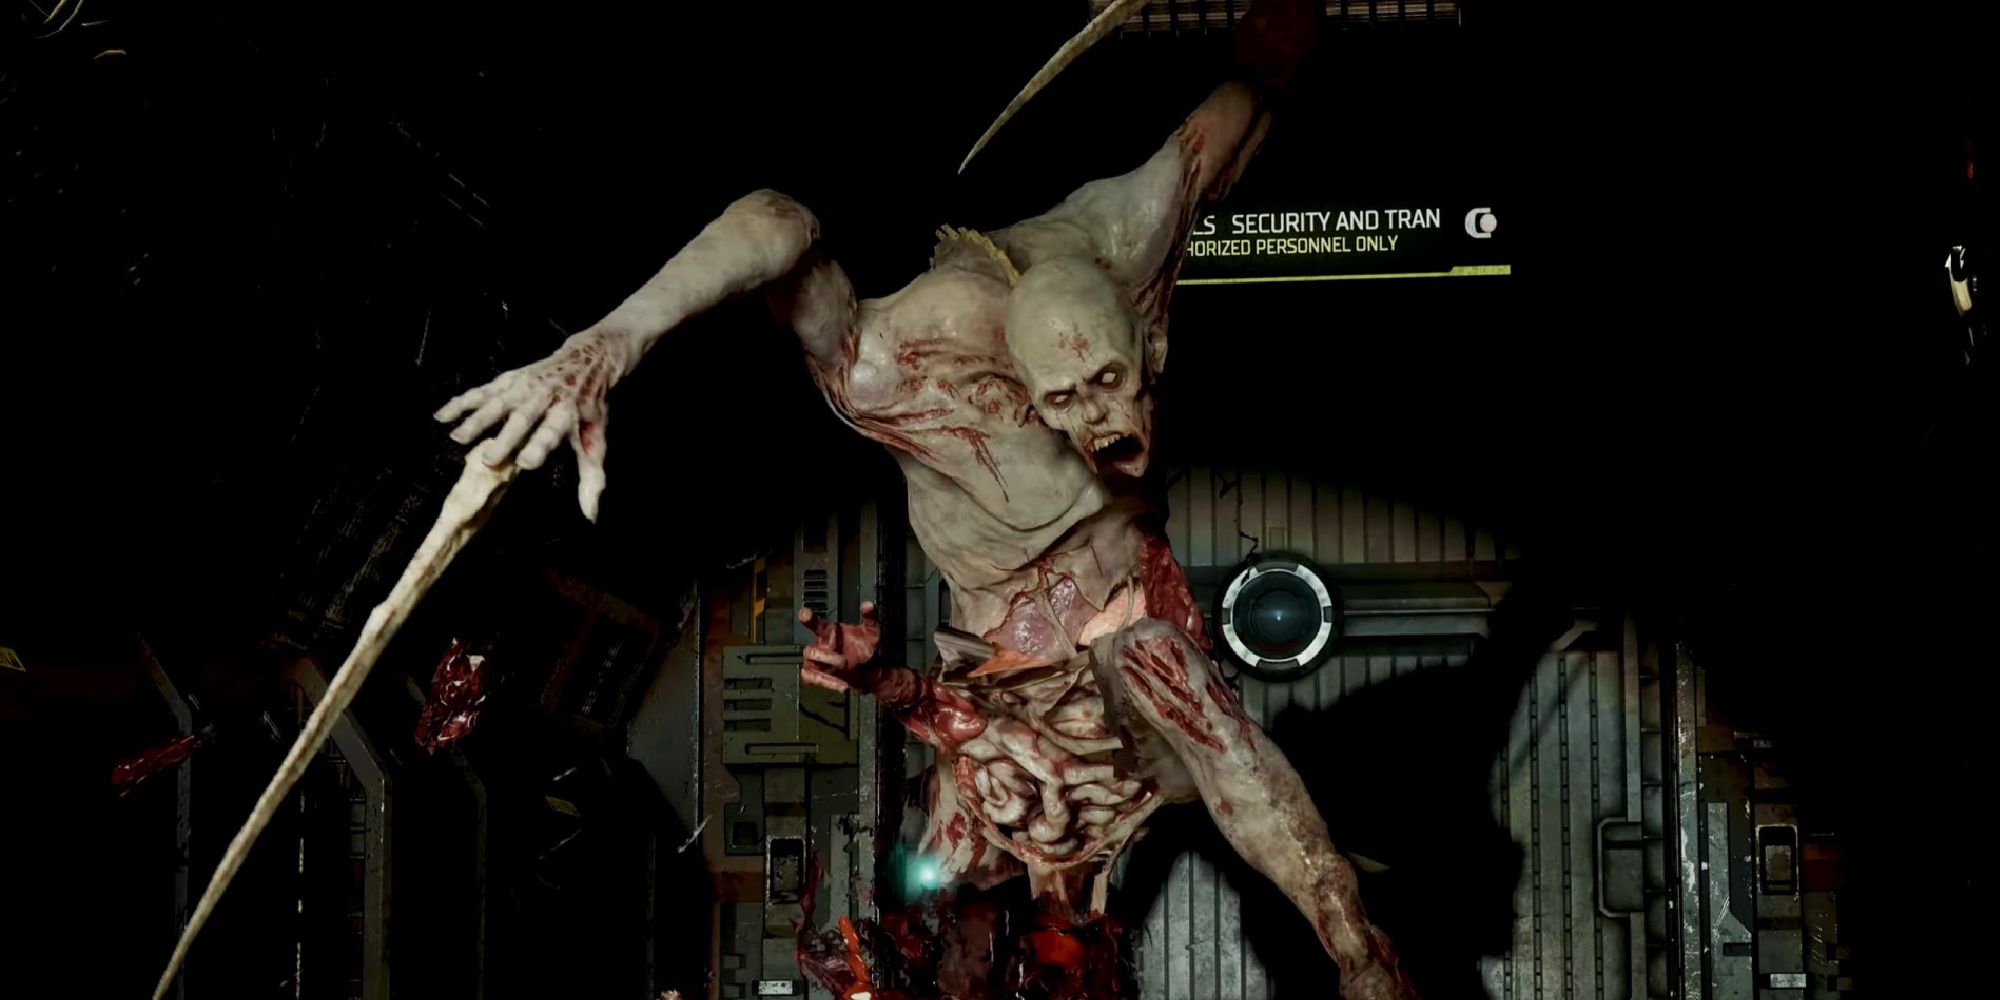 A Necromorph lunging towards camera with blood and guts showing